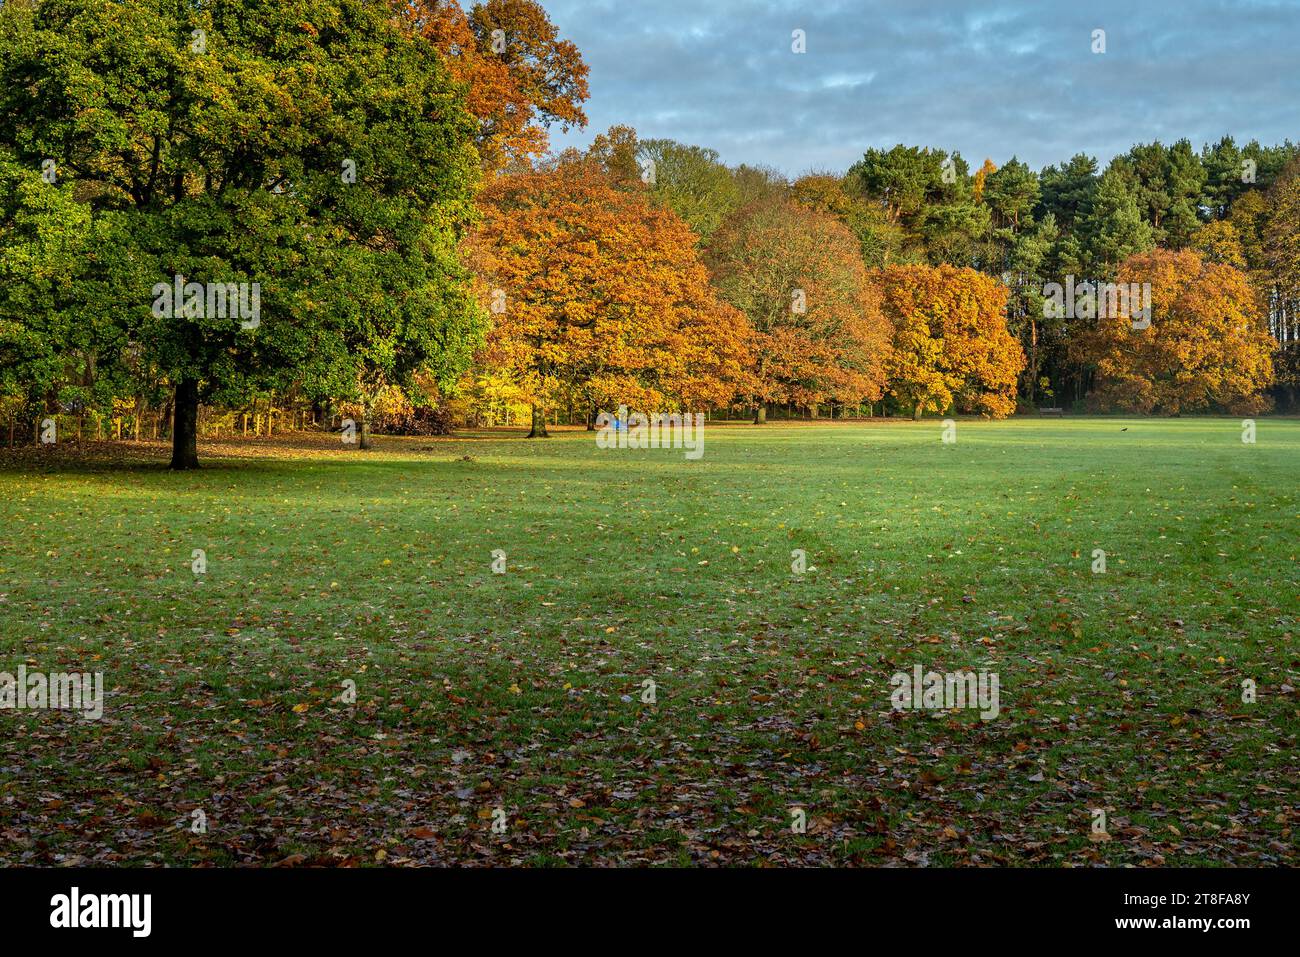 A view of trees in a public park in Ayr Stock Photo